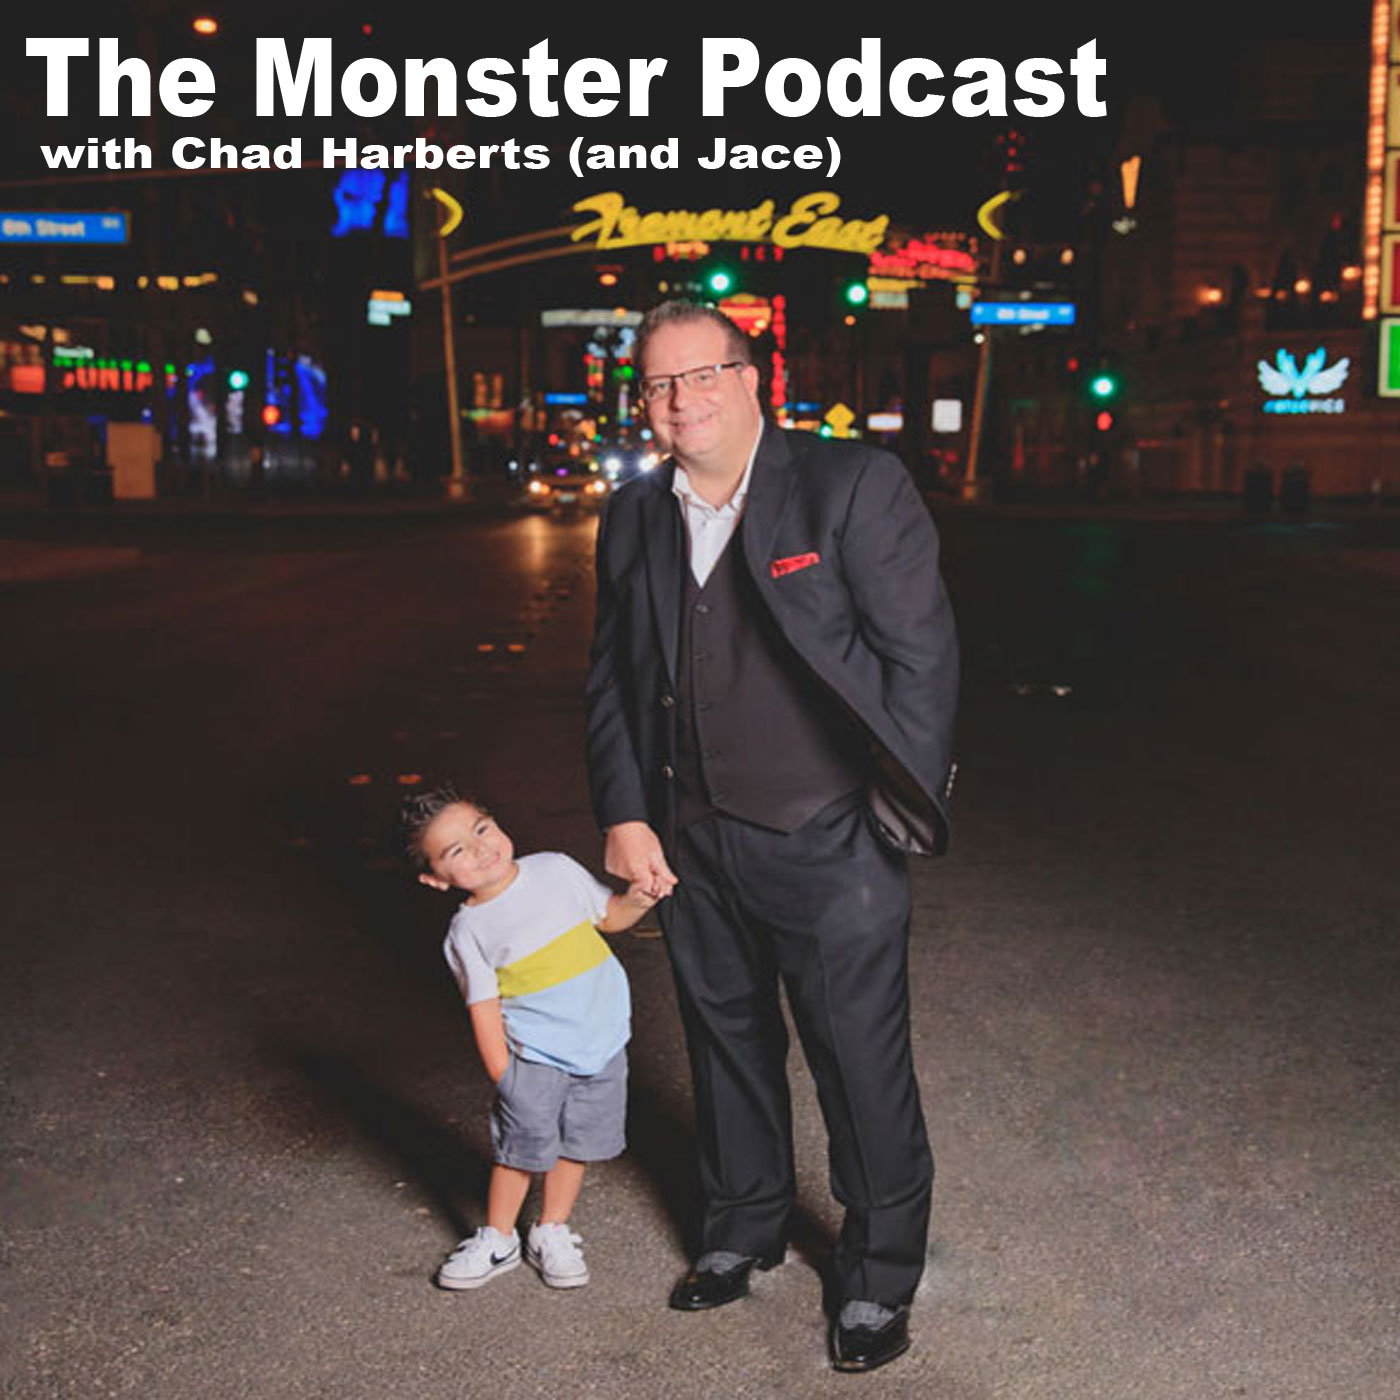 The Monster Podcast With Chad Harberts